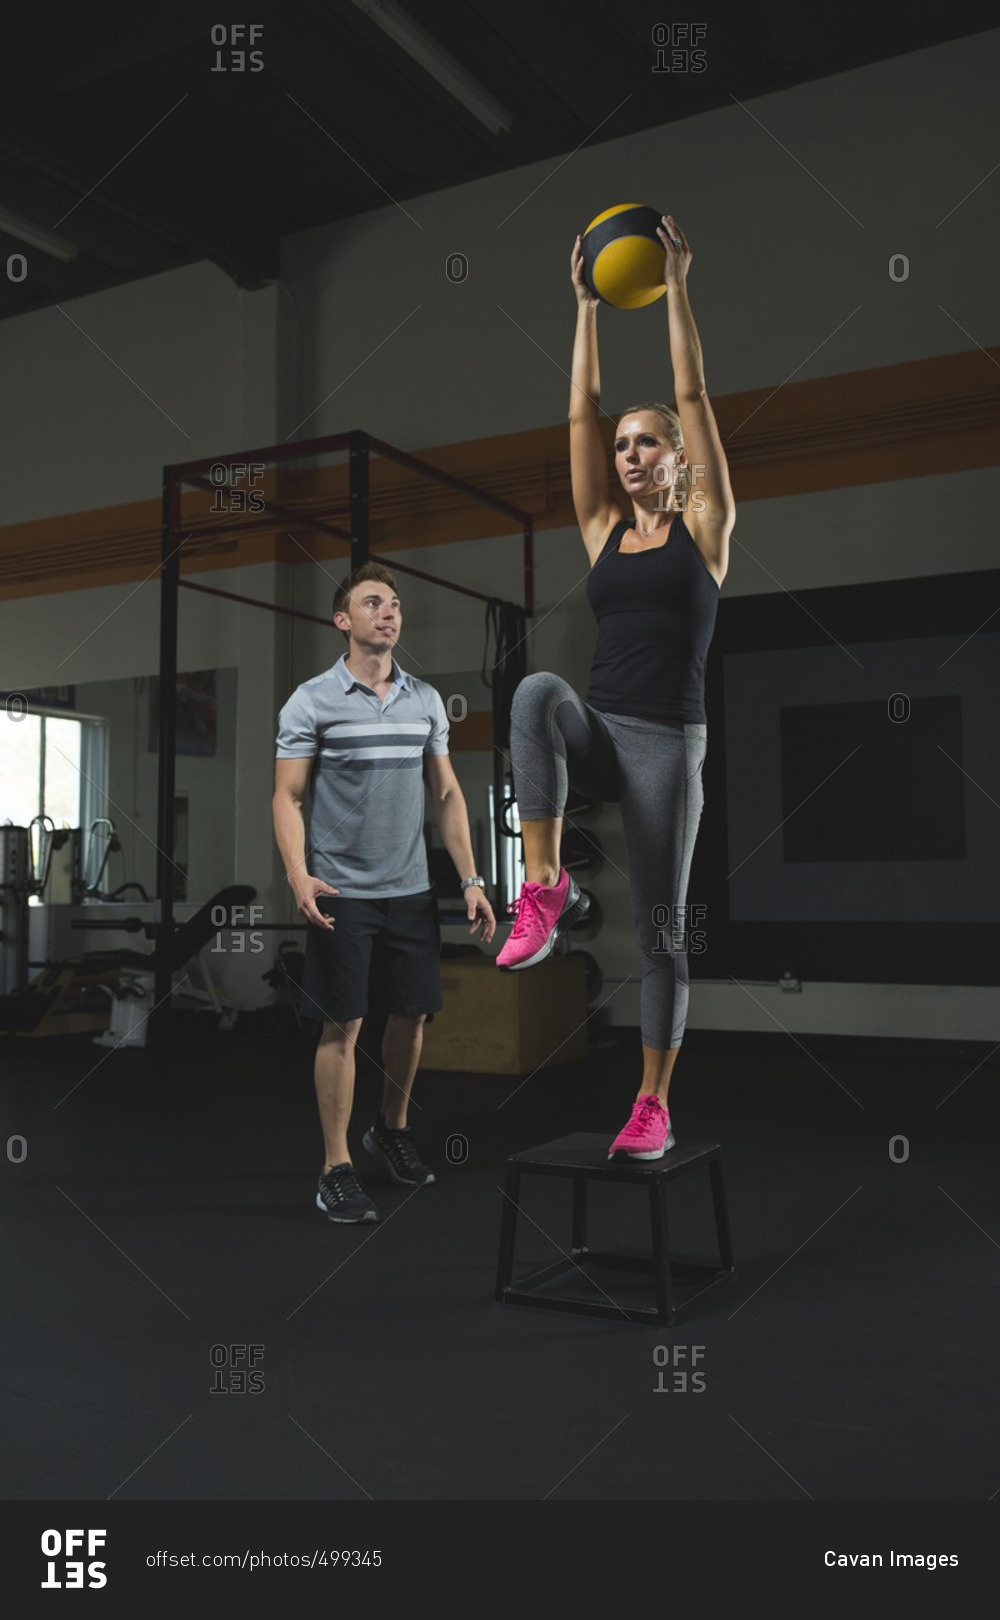 Trainer looking at woman holding fitness ball standing on stool in gym